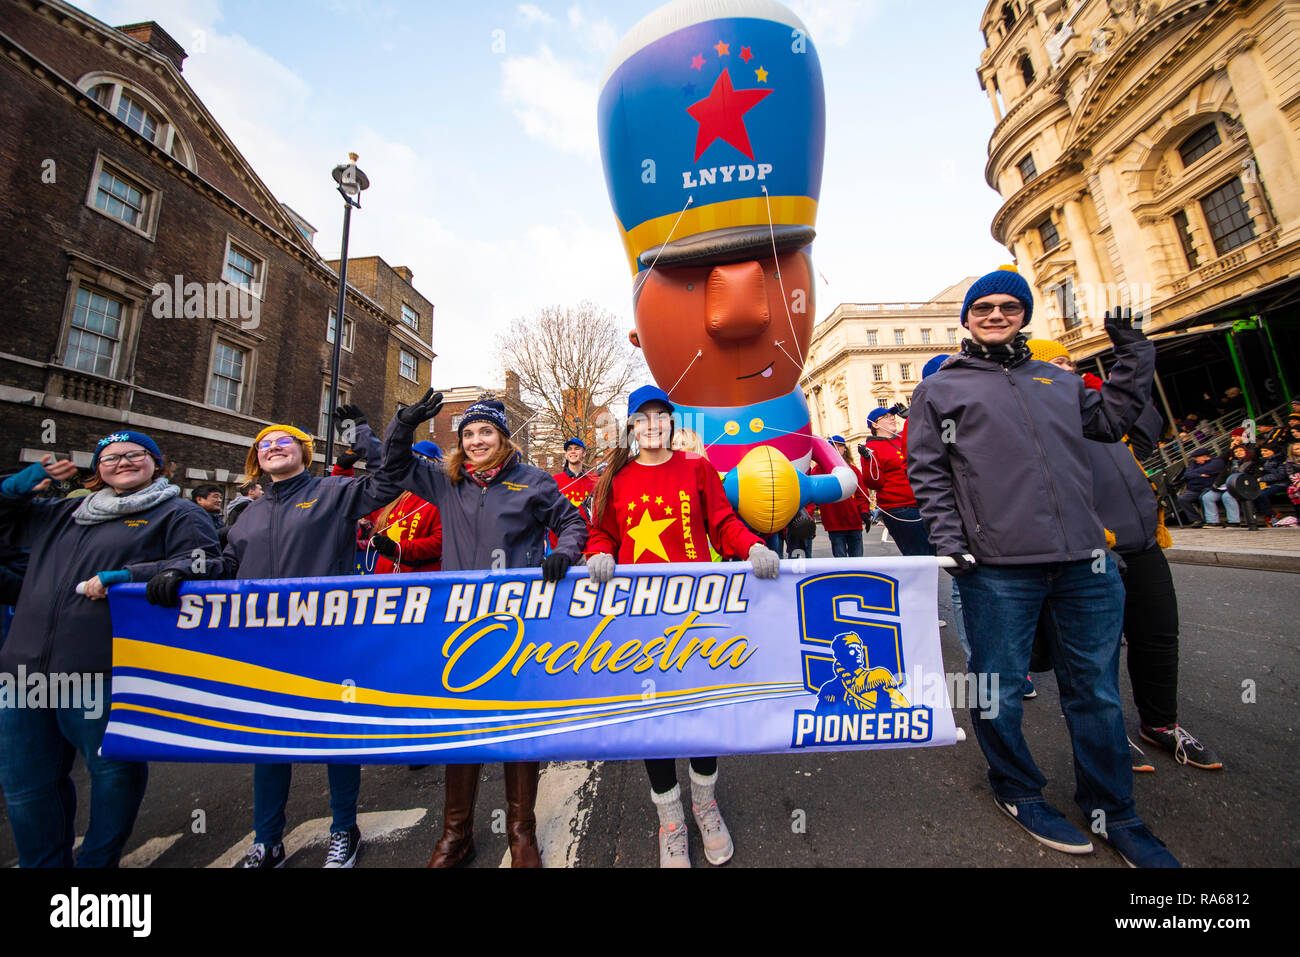 Stillwater High School Philharmonic String Orchestra from Oklahoma USA with Marching Band Player Giant Balloon at London's New Year's Day Parade 2019 Stock Photo